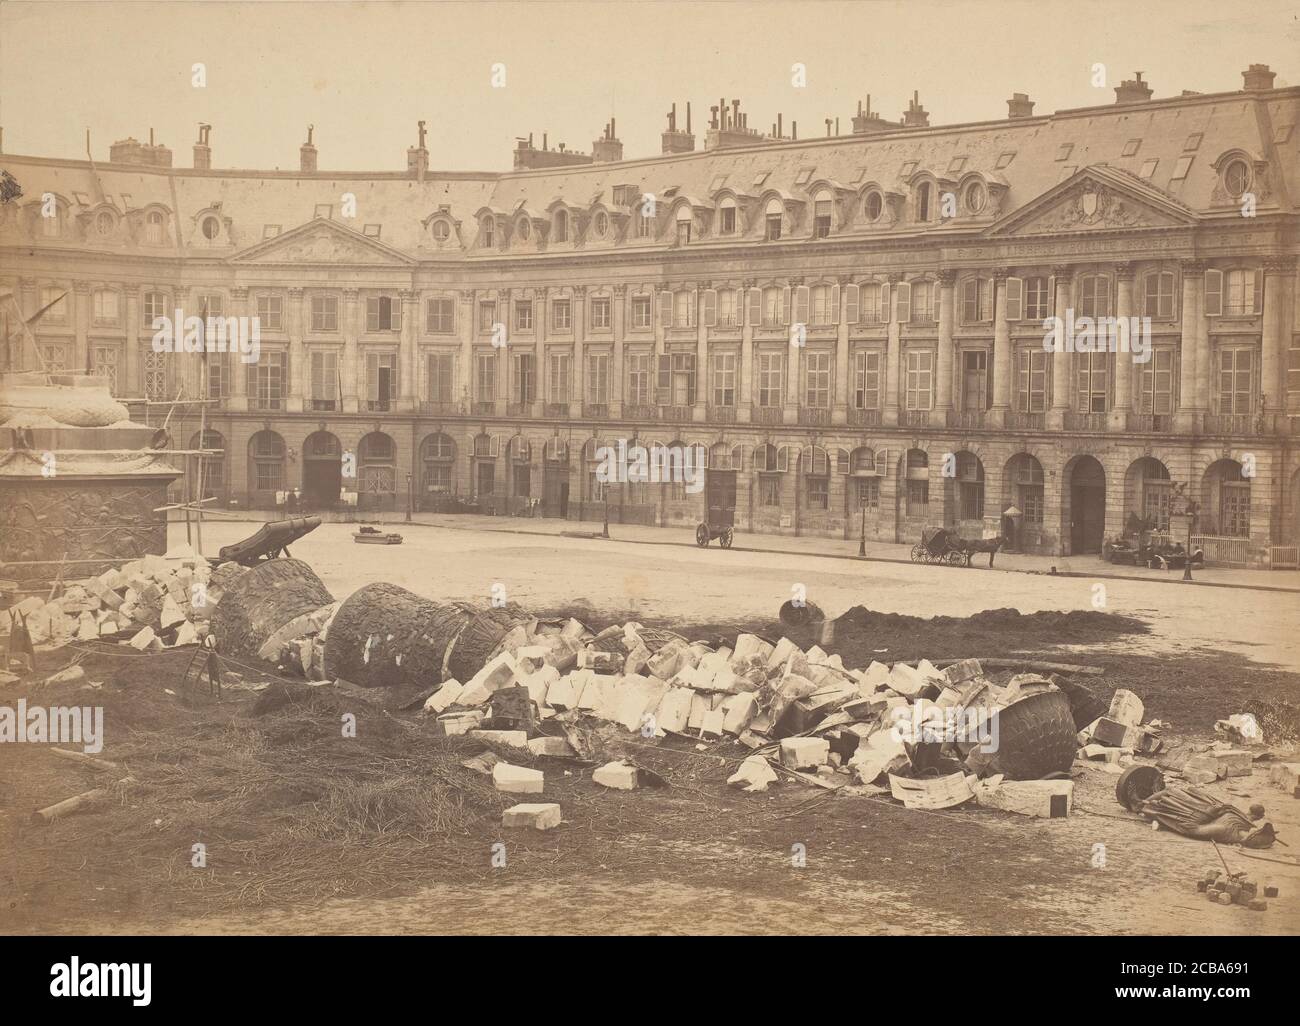 [The Vend&#xf4;ME Column After being Rriss Down by the Communards], 1871. Stockfoto